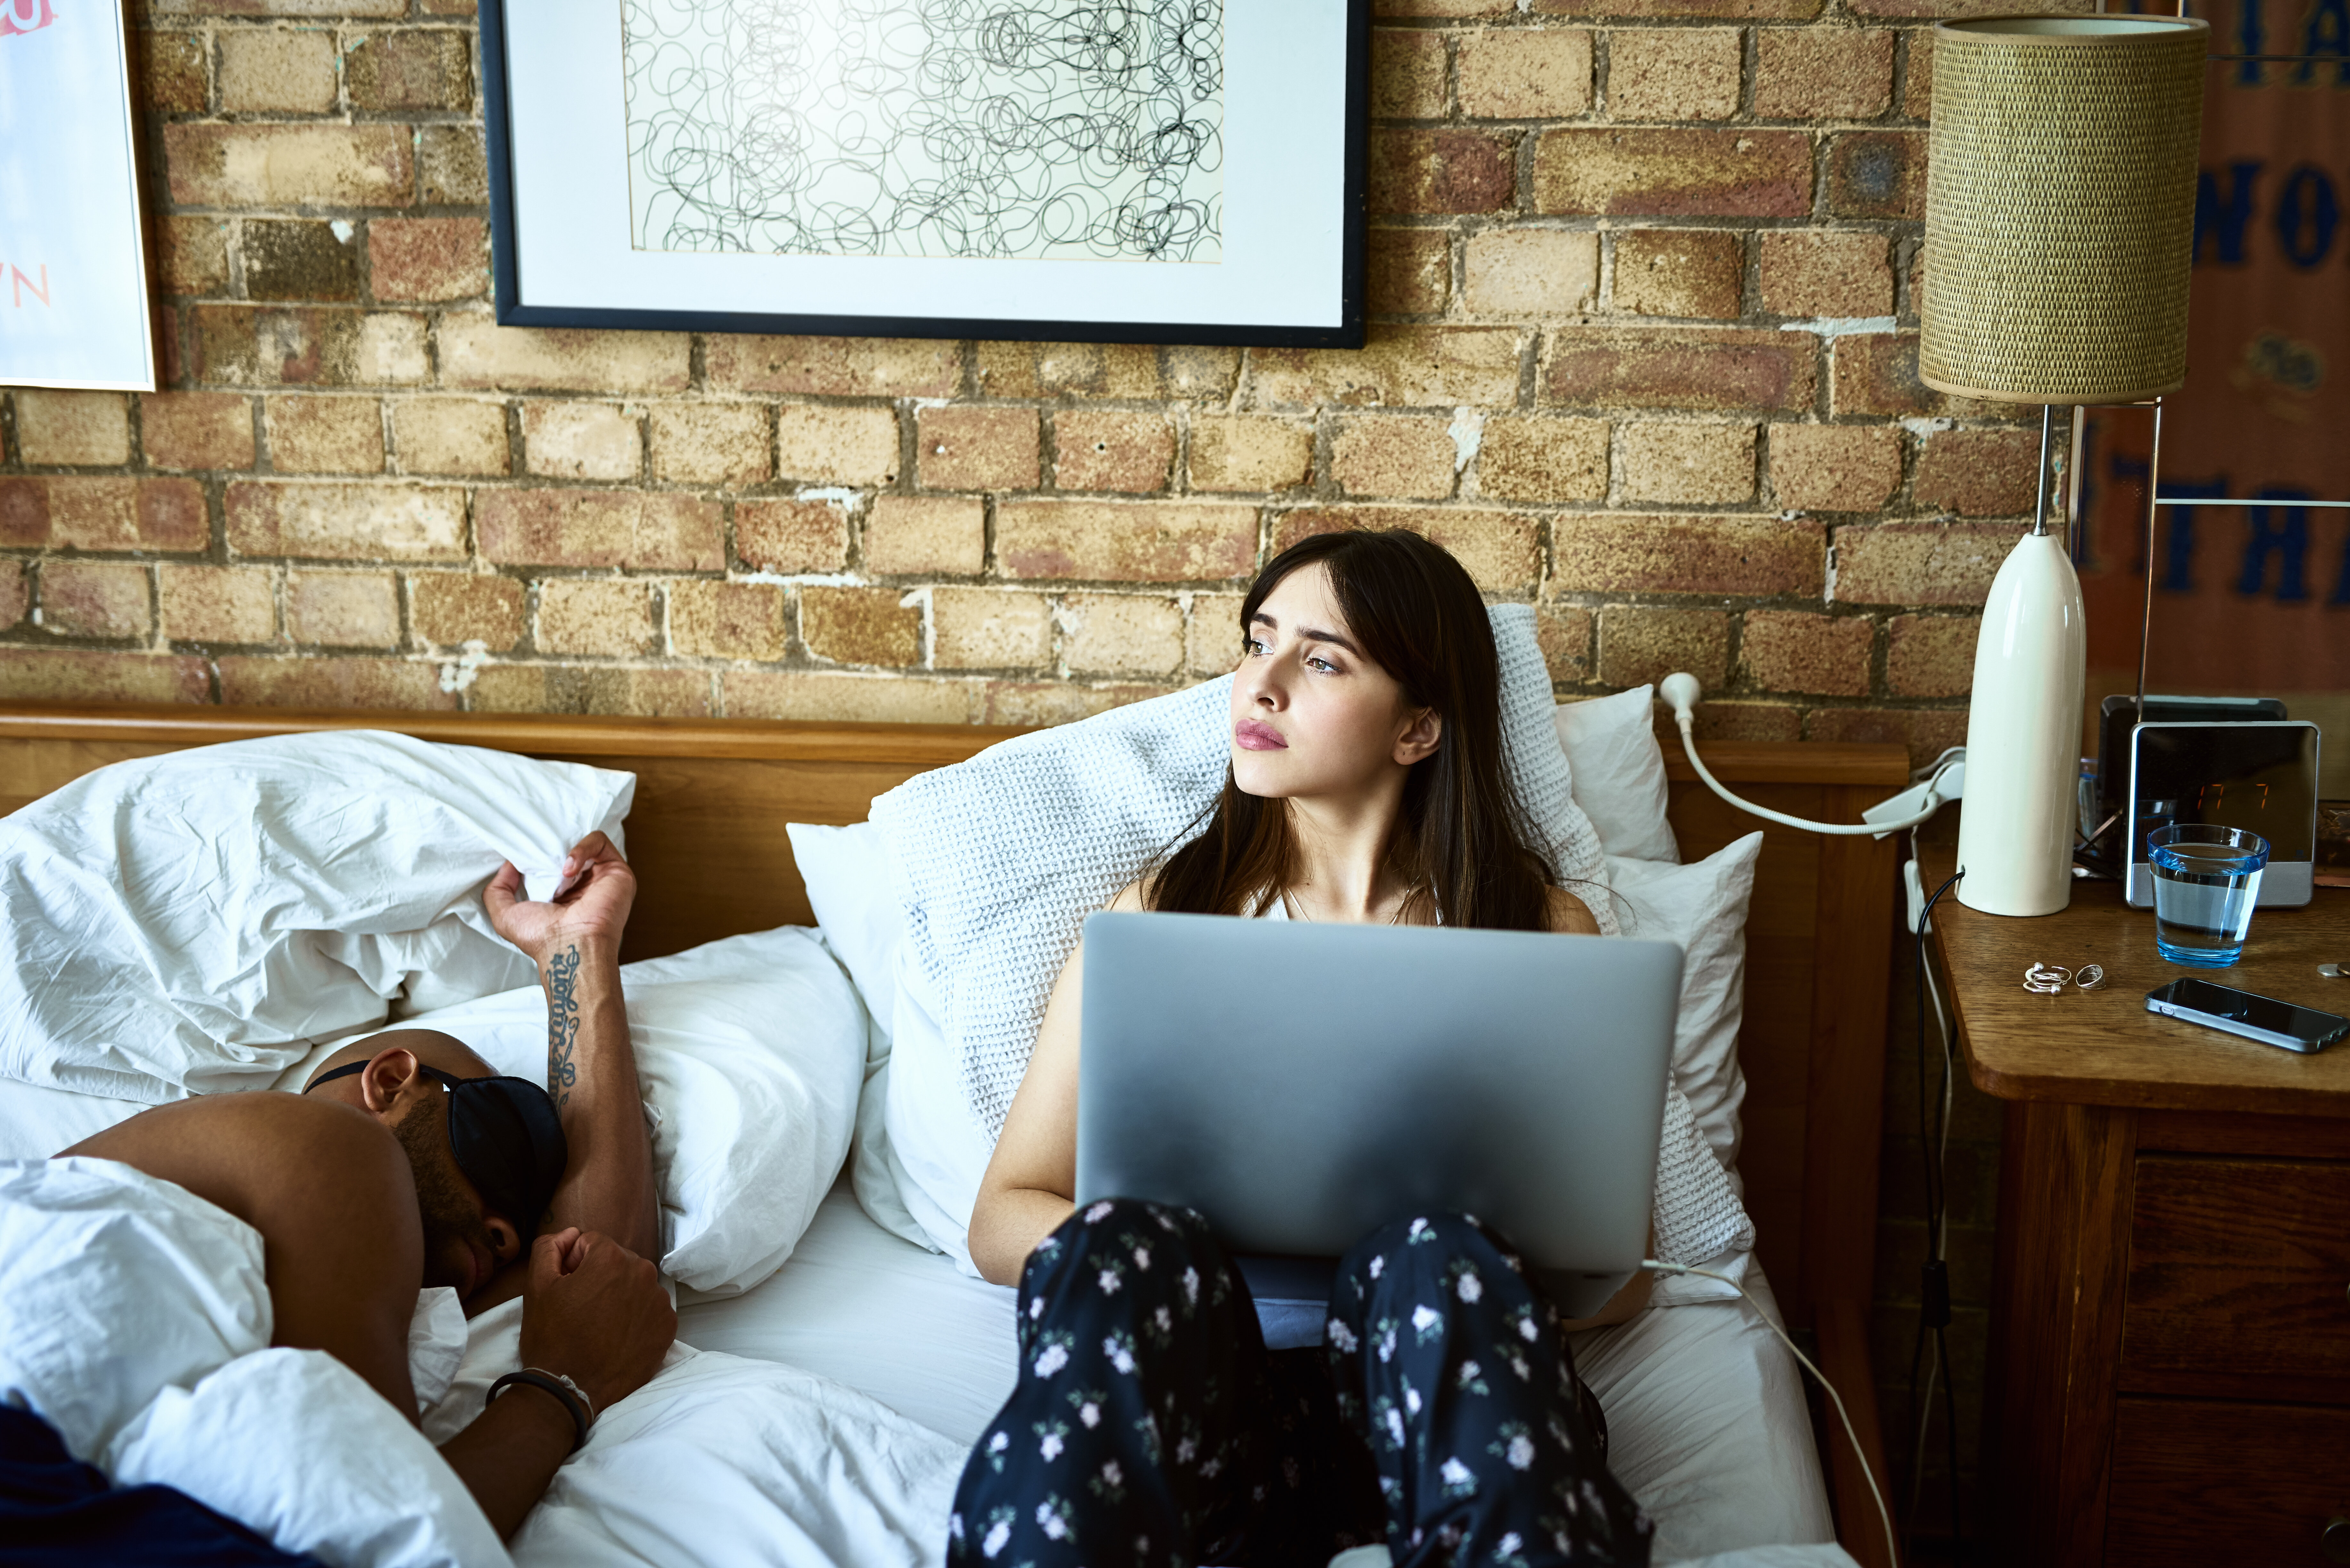 Man and woman stay on bed stock photo. Image of love - 177561196